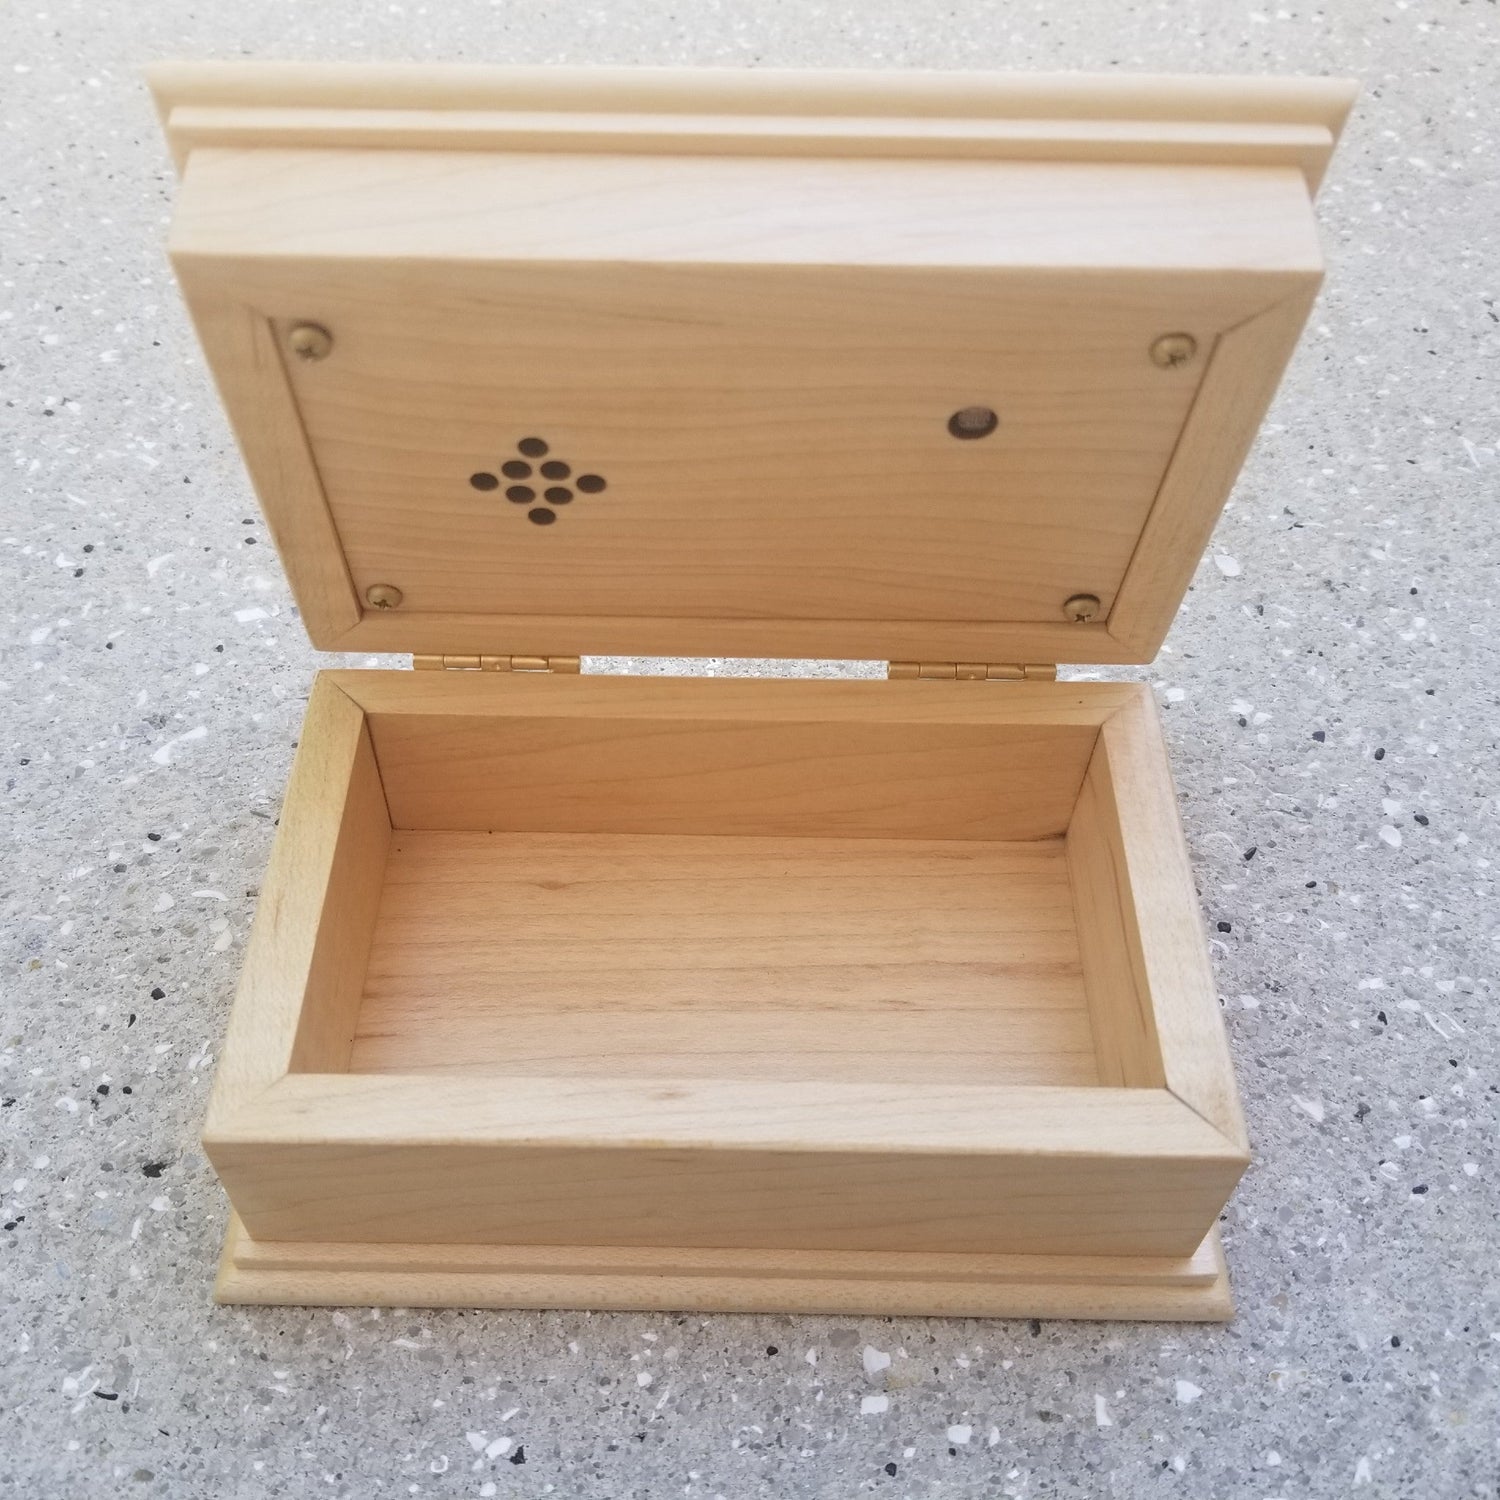 wooden music box with an open lid showing panel with the light sensor and the speaker under the lid